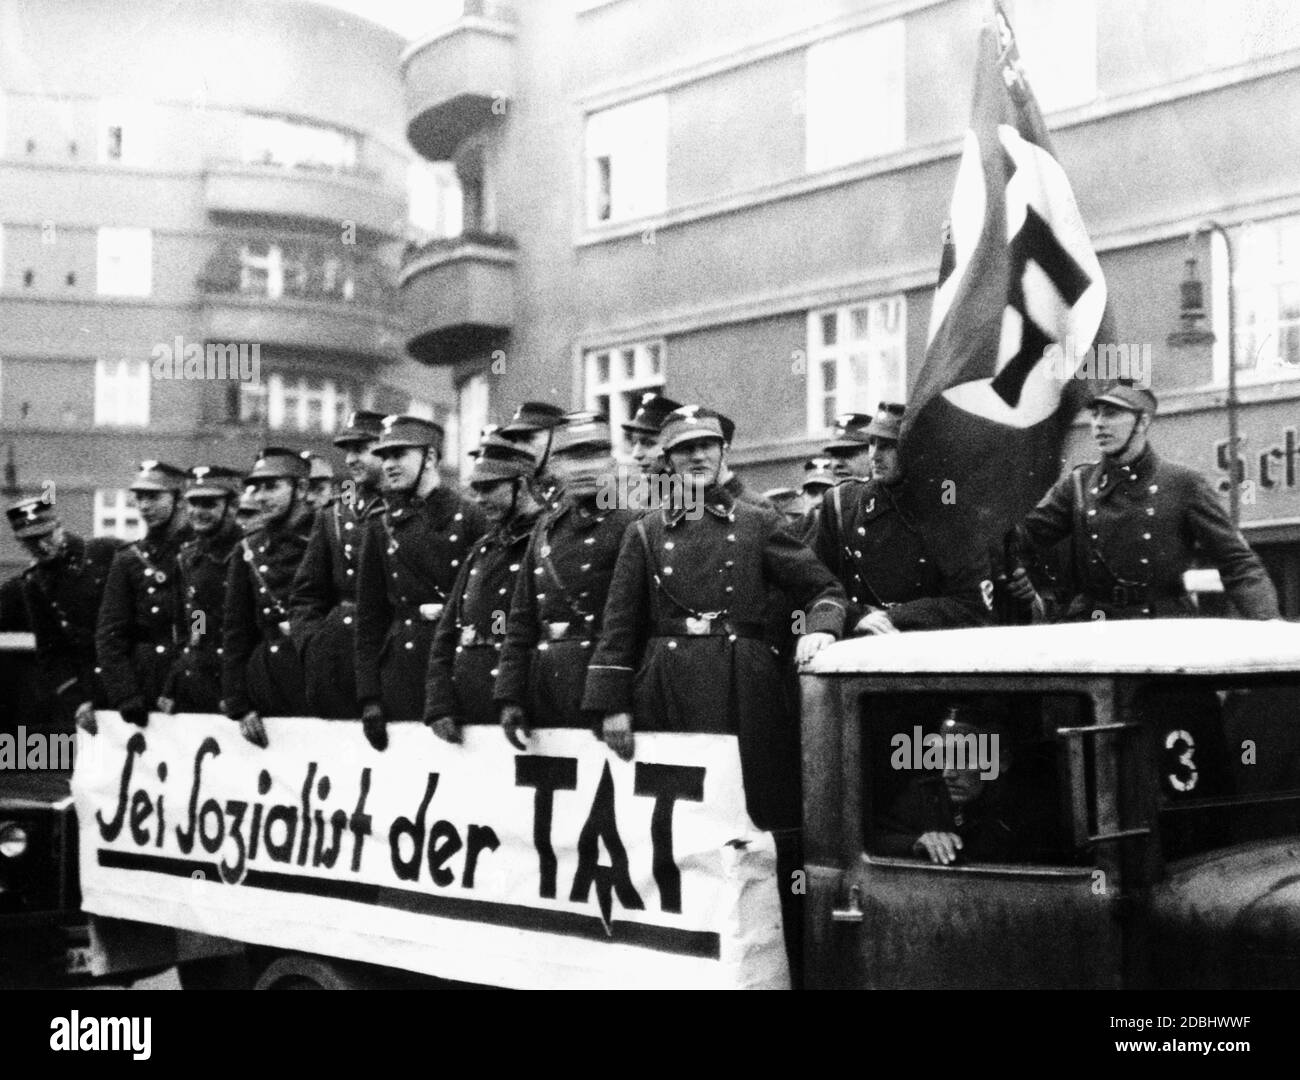 'SA members stand on the loading area of a truck. On the truck is a banner saying ''Sei Sozialist der Tat'' (Be a socialist in action). (undated photo)' Stock Photo